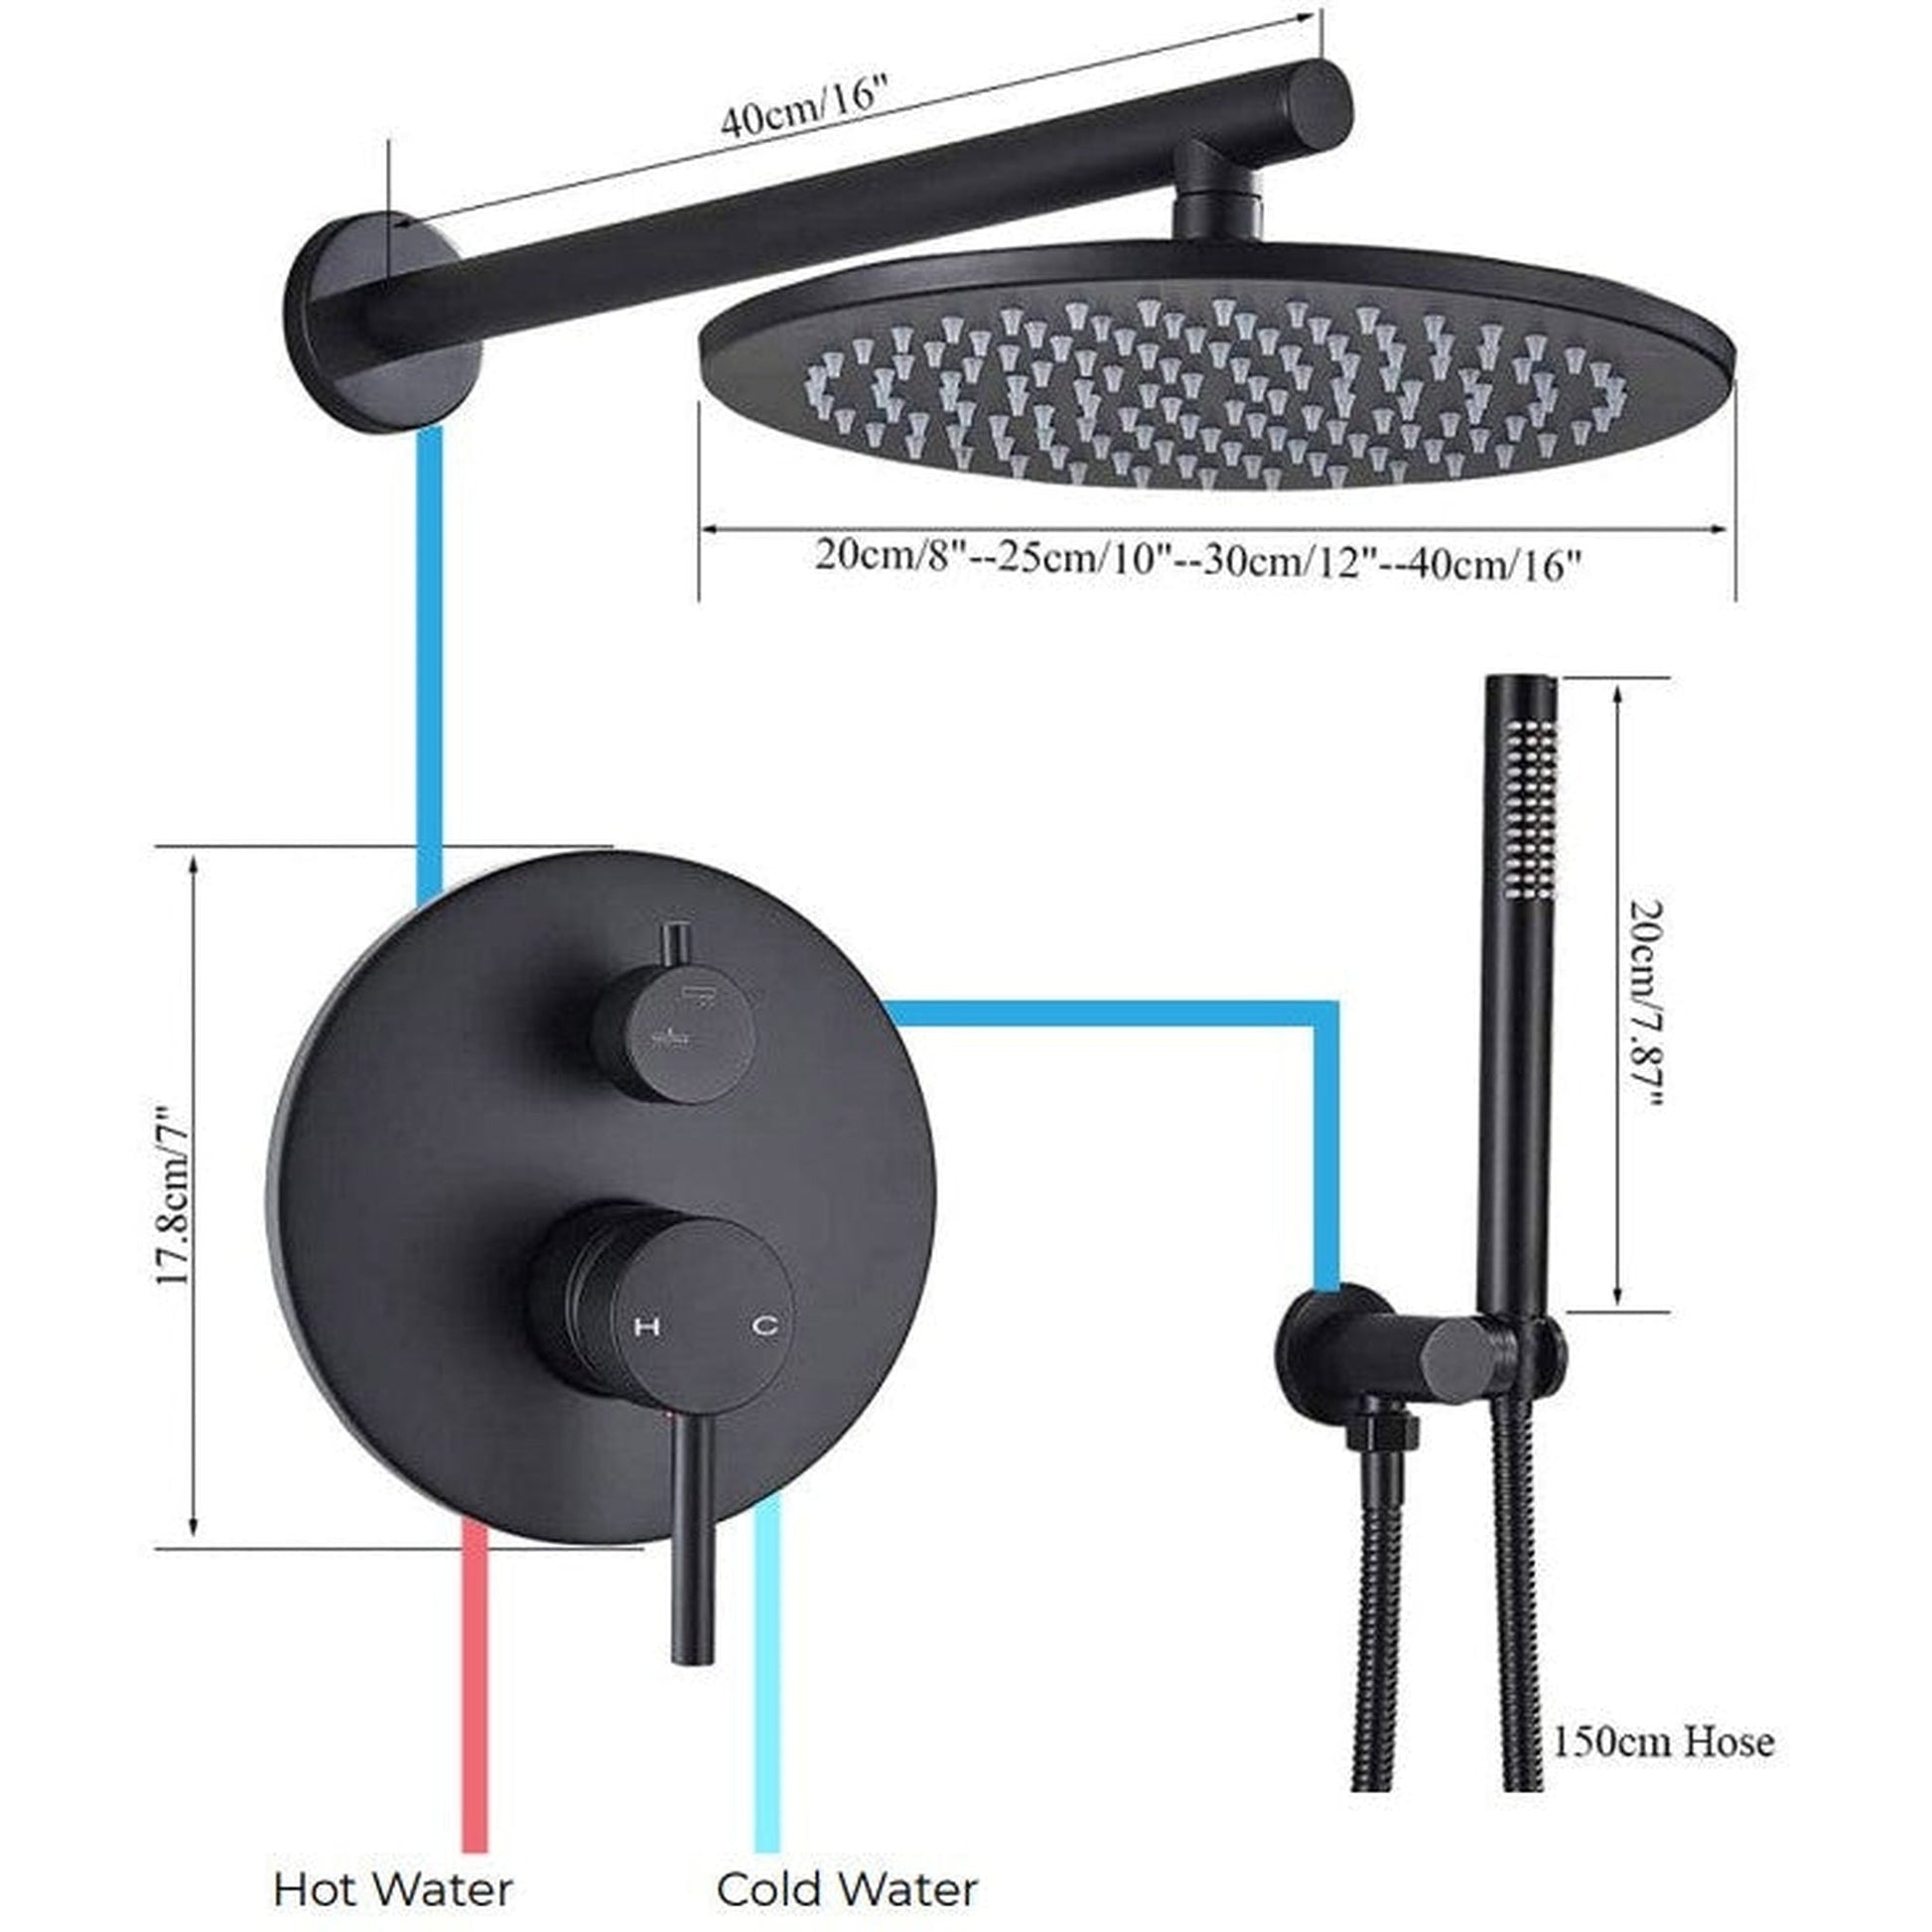 FontanaShowers Verona Creative Luxury 8" Dark Oil Rubbed Bronze Round Wall-Mounted Shower Head Hot and Cold Mixer Rainfall Shower System With Hand Shower